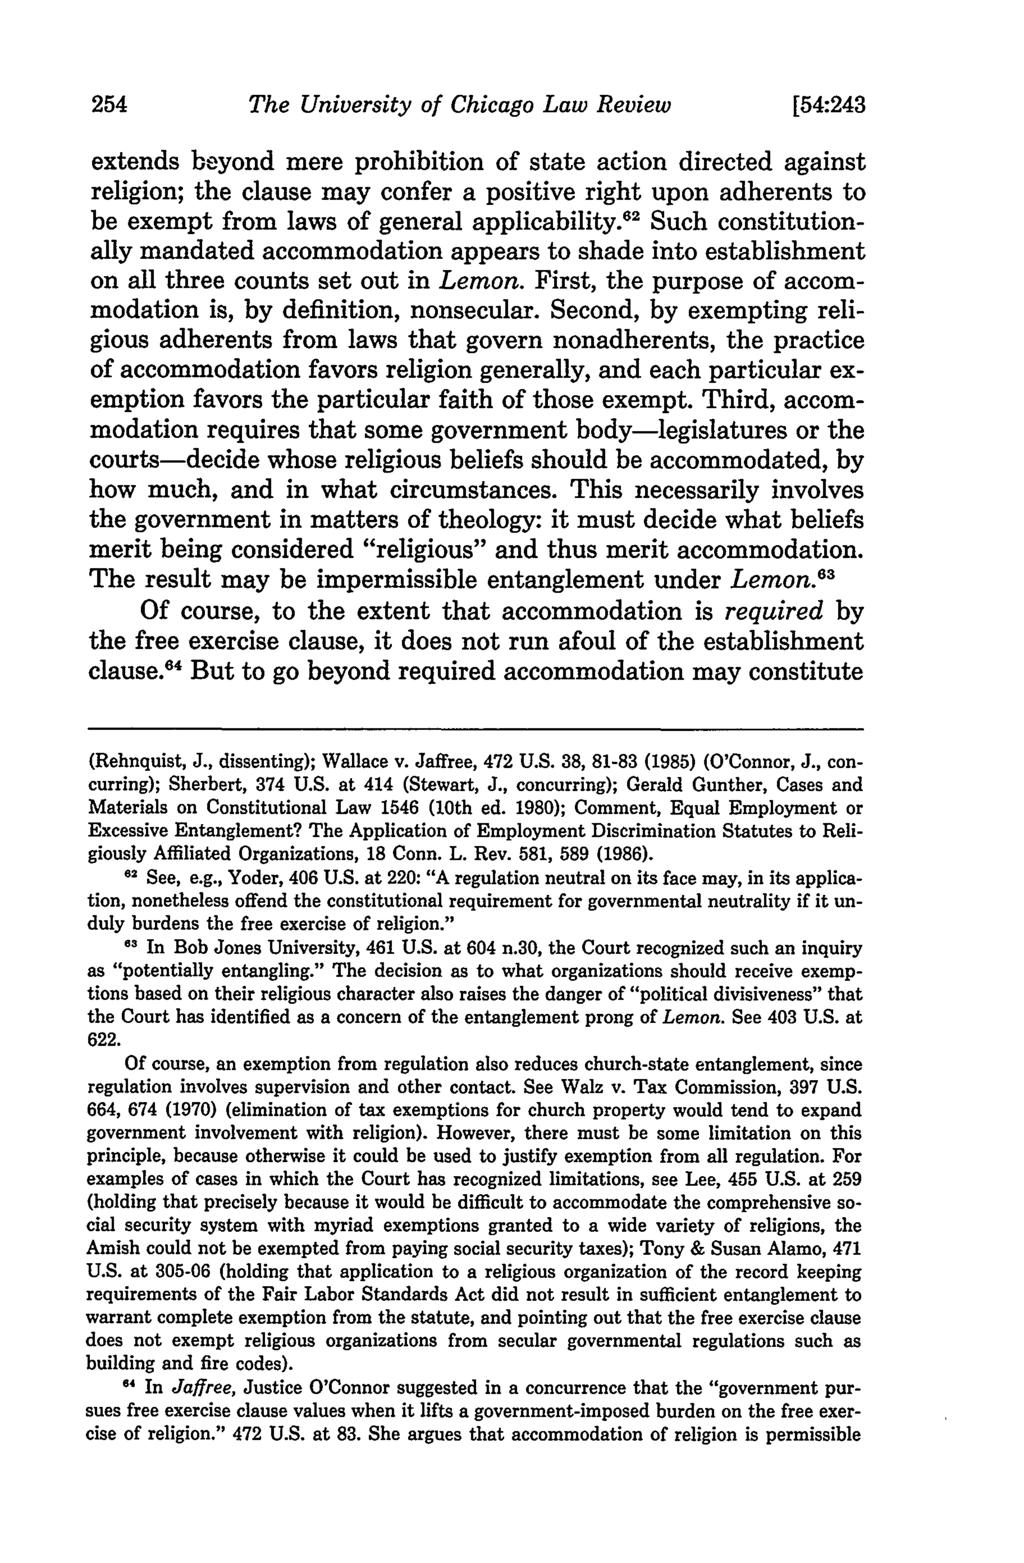 The University of Chicago Law Review [54:243 extends beyond mere prohibition of state action directed against religion; the clause may confer a positive right upon adherents to be exempt from laws of